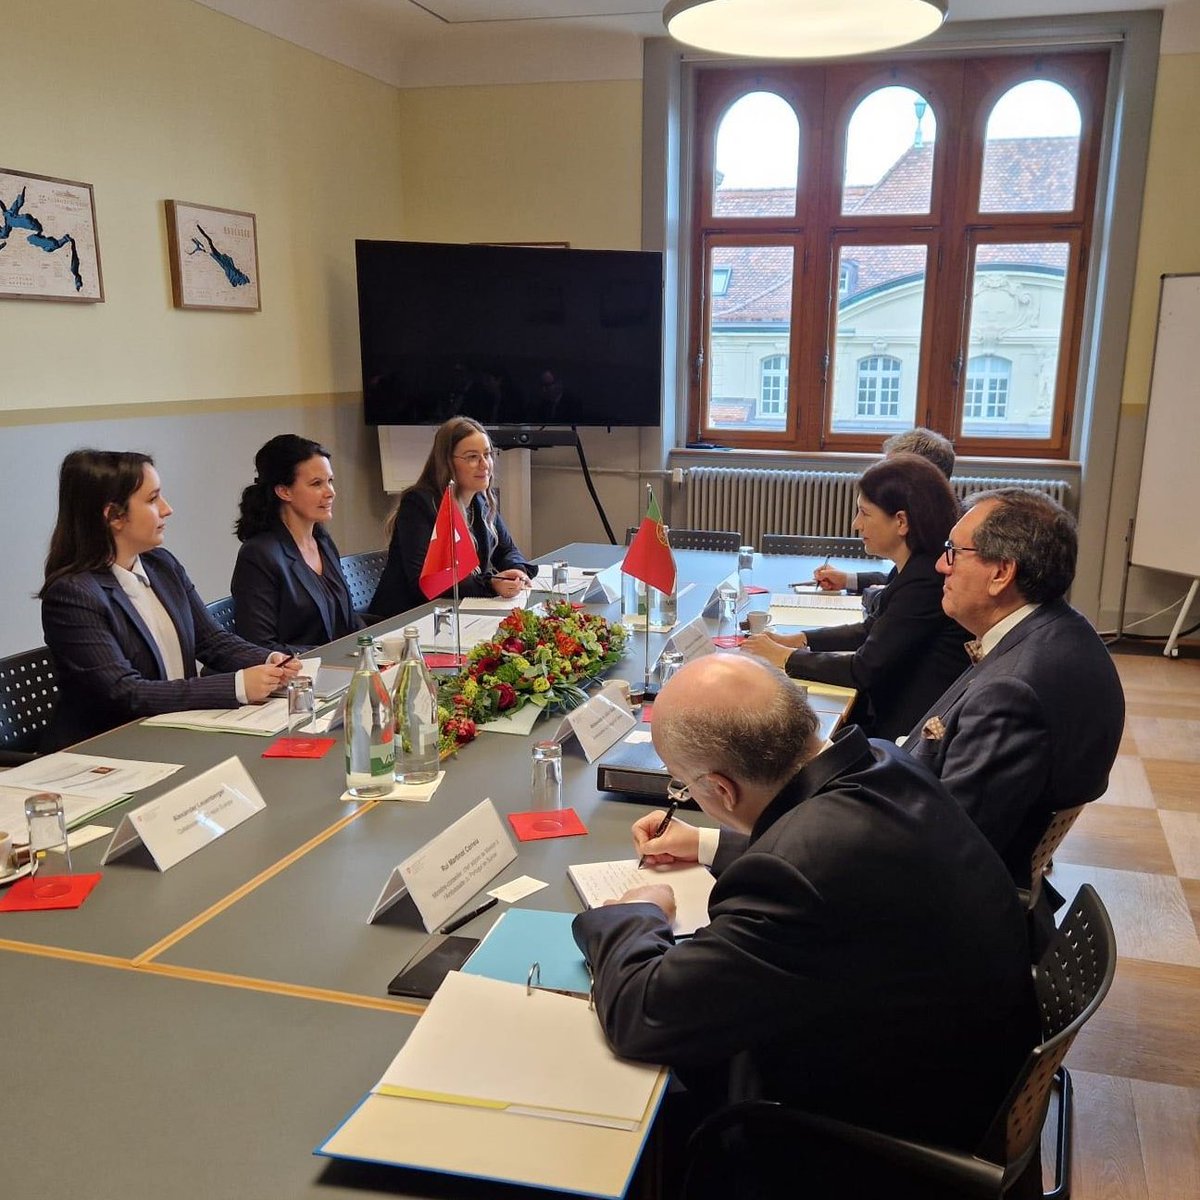 Today’s political consultations 🇨🇭-🇵🇹 were a great opportunity to discuss the excellent bilateral relations, #EuropeanAffairs and the #UAPeaceSummit hosted in June by 🇨🇭

By the way, did you know that Portuguese is after English the most widely spoken foreign language in 🇨🇭 ?